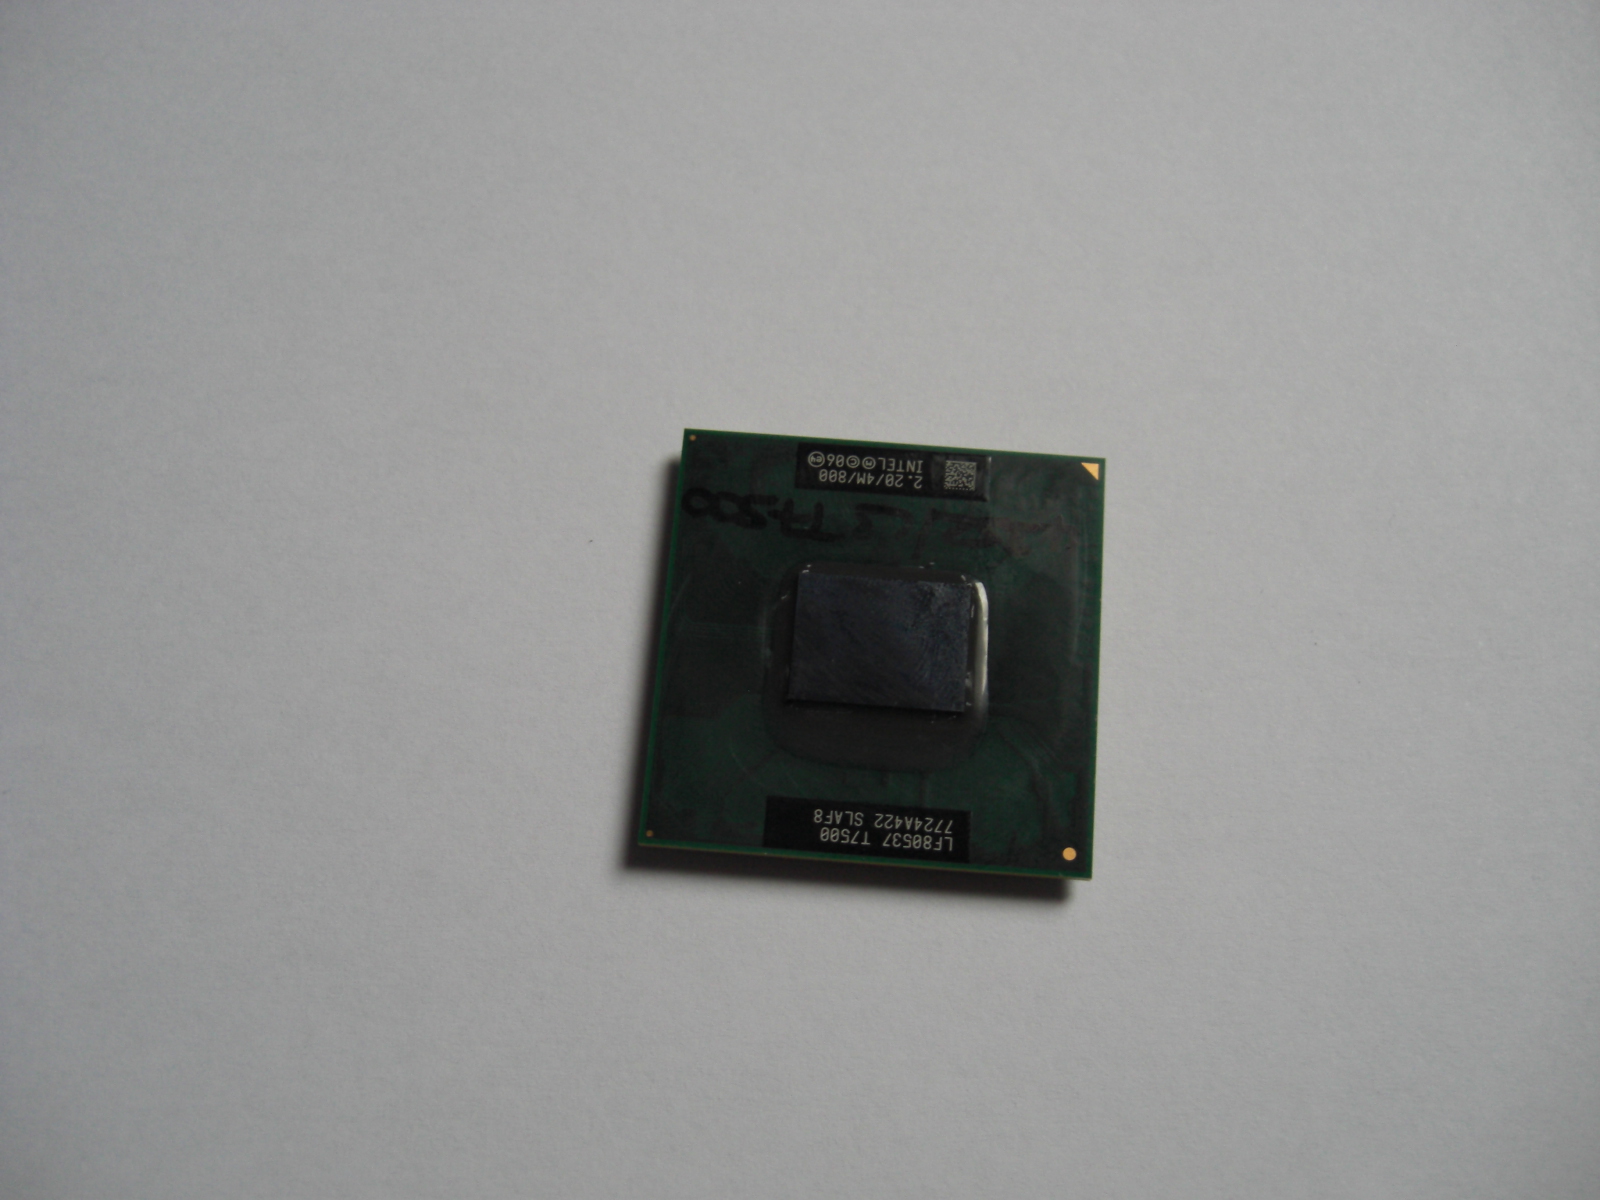 INTEL CORE 2 DUO M 2.2GHZ 800MHZ